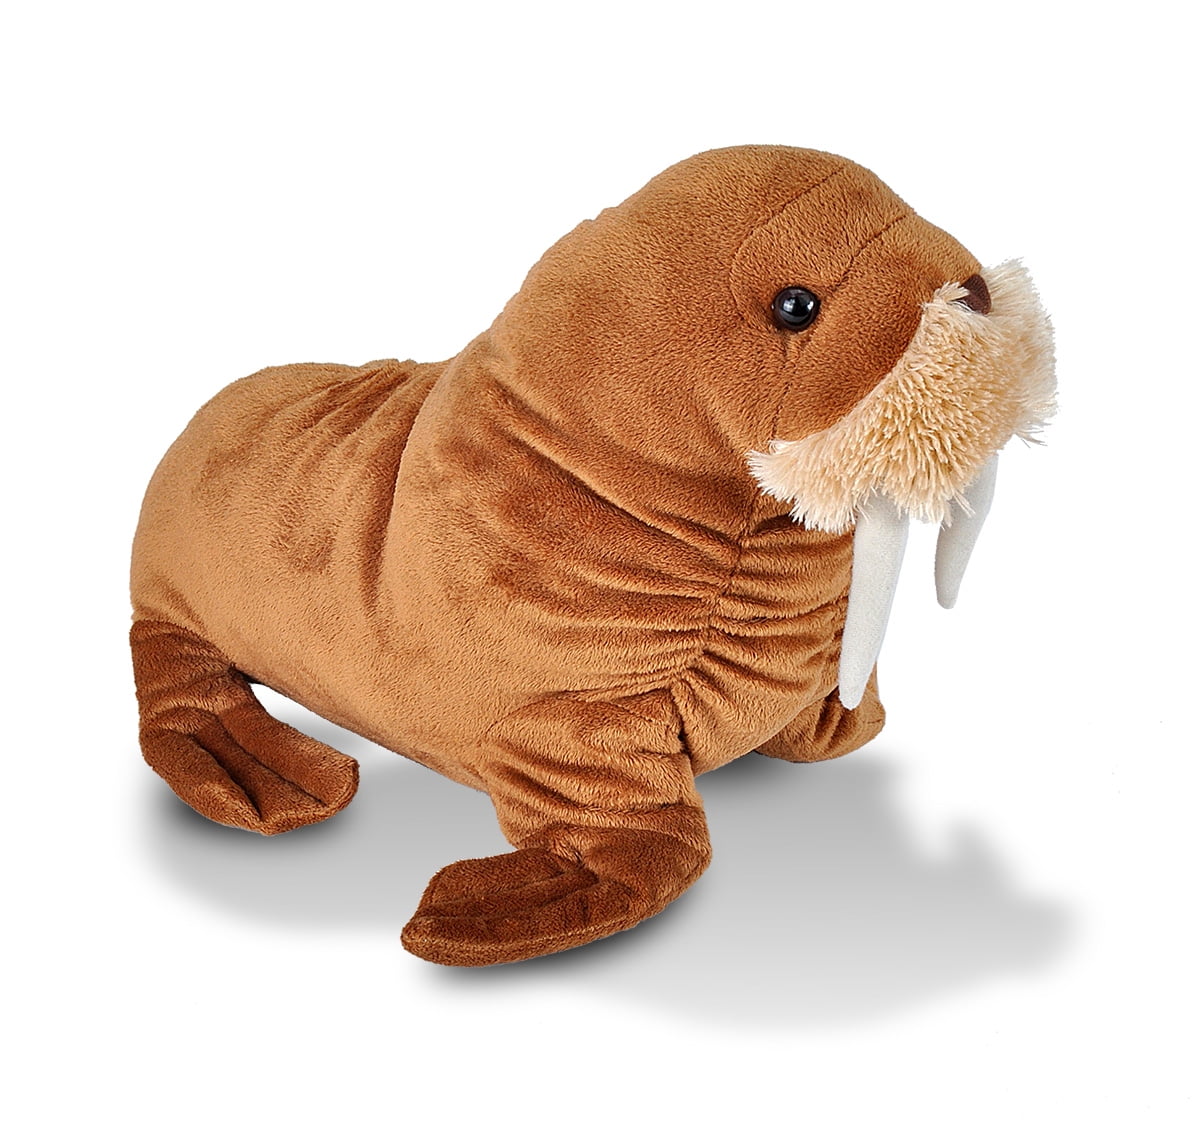 Stuffed Animal Wlidlife Realistic Zoo 3 for sale online 16" GUND Plush Wallace The Walrus 